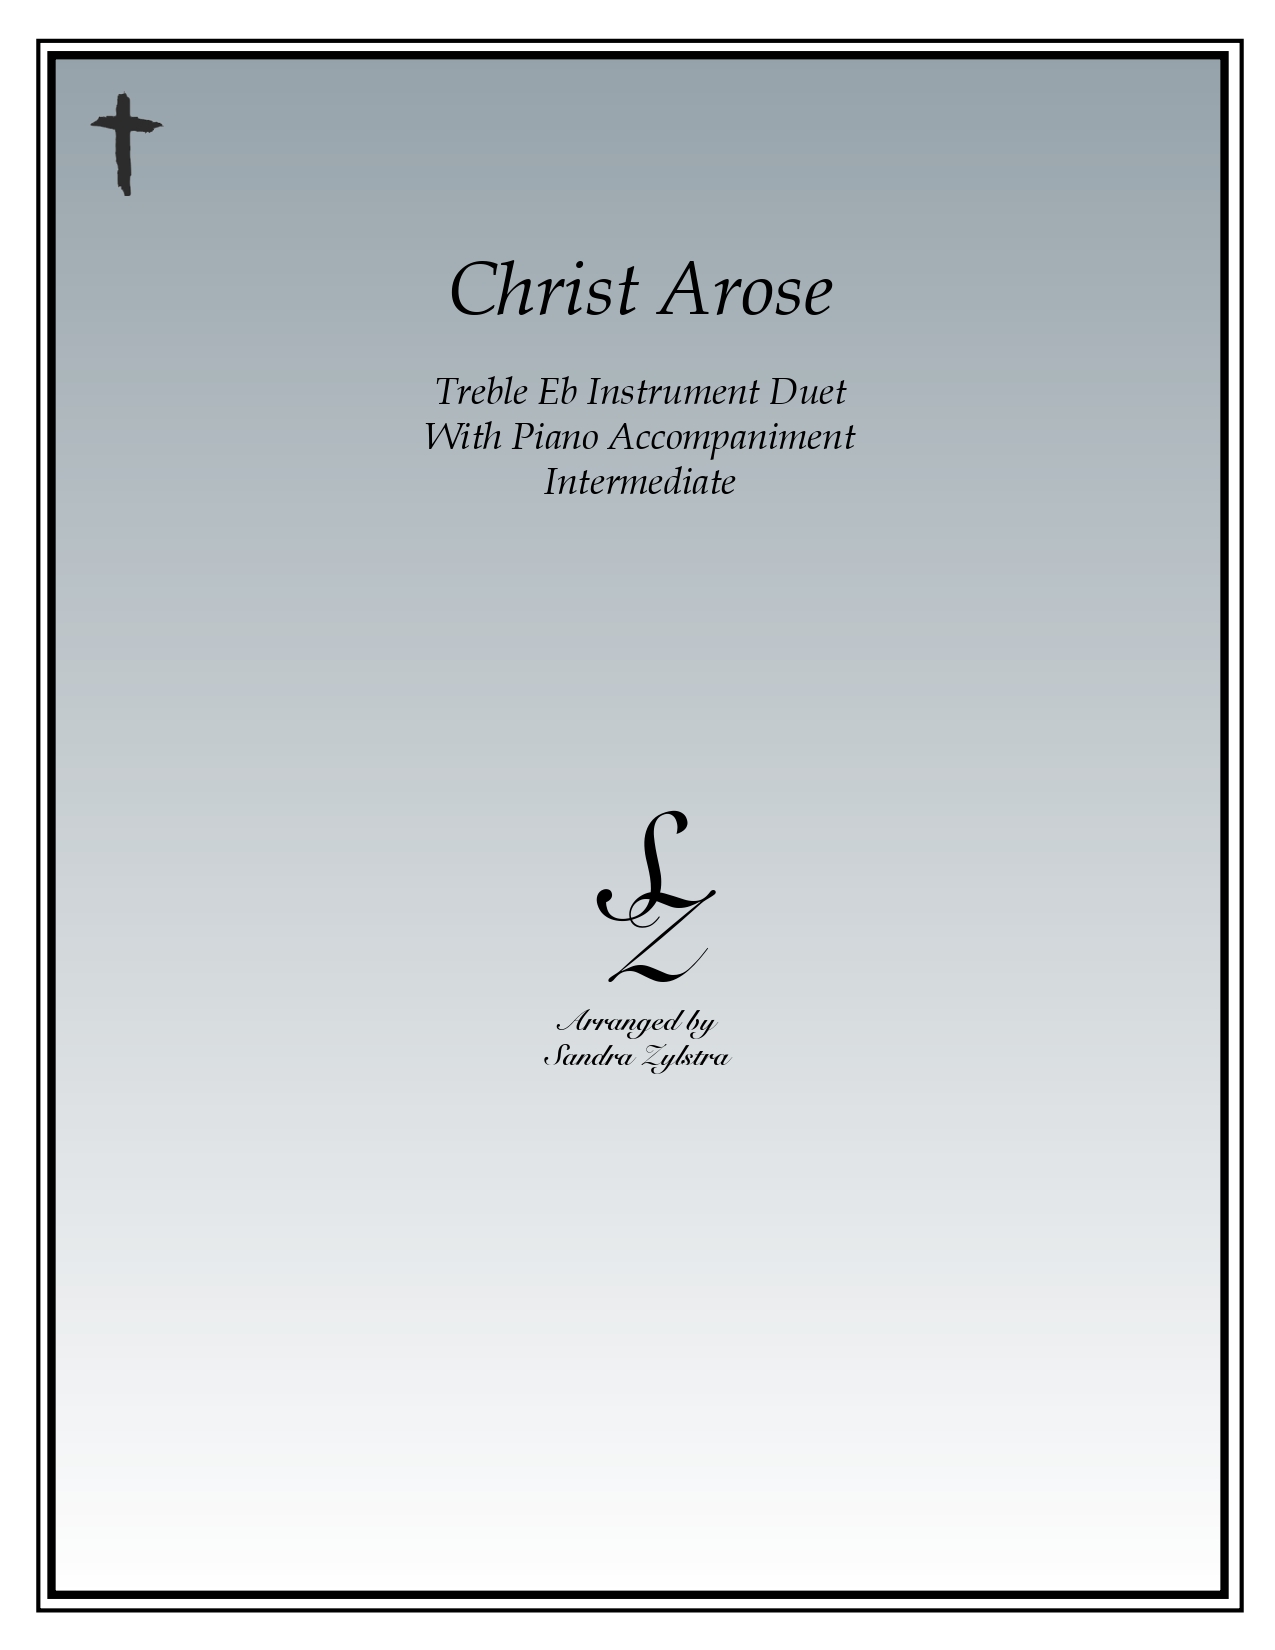 Christ Arose Eb instrument duet parts cover page 00011